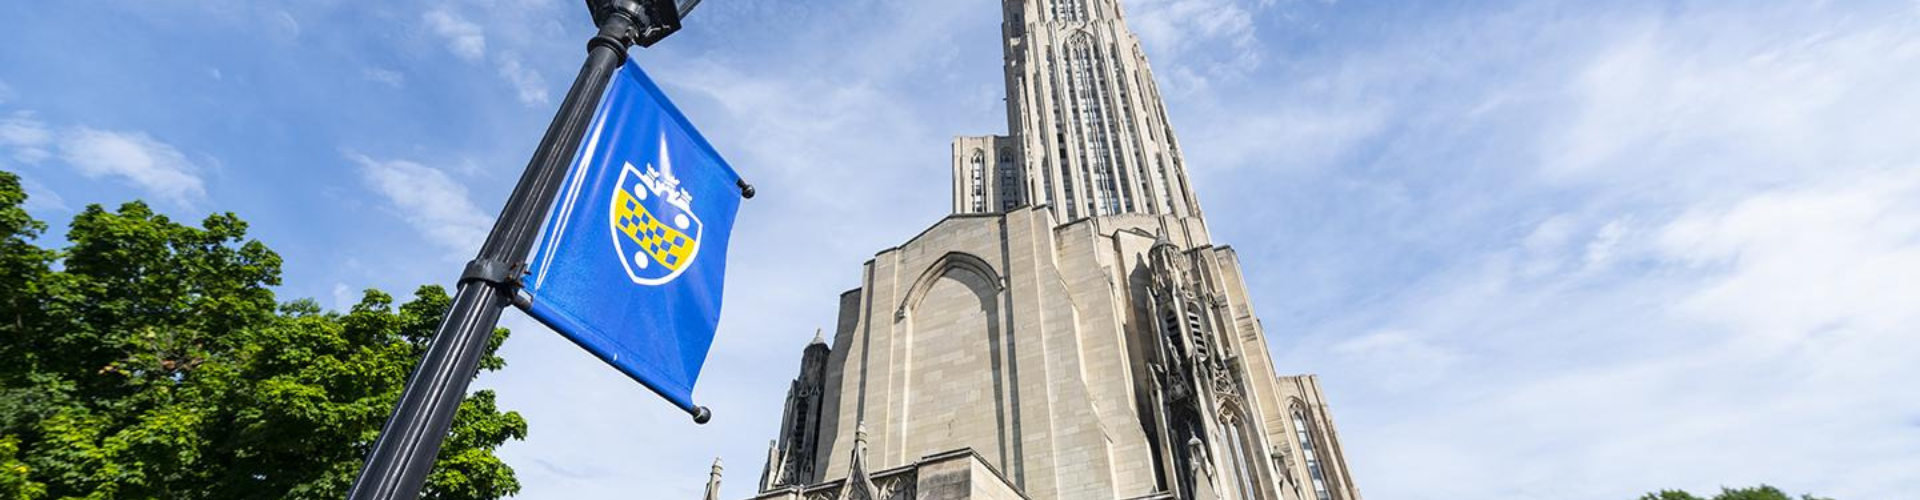 A Pitt flag foregrounds a low angle shot of the Cathedral of Learning against a blue sky.